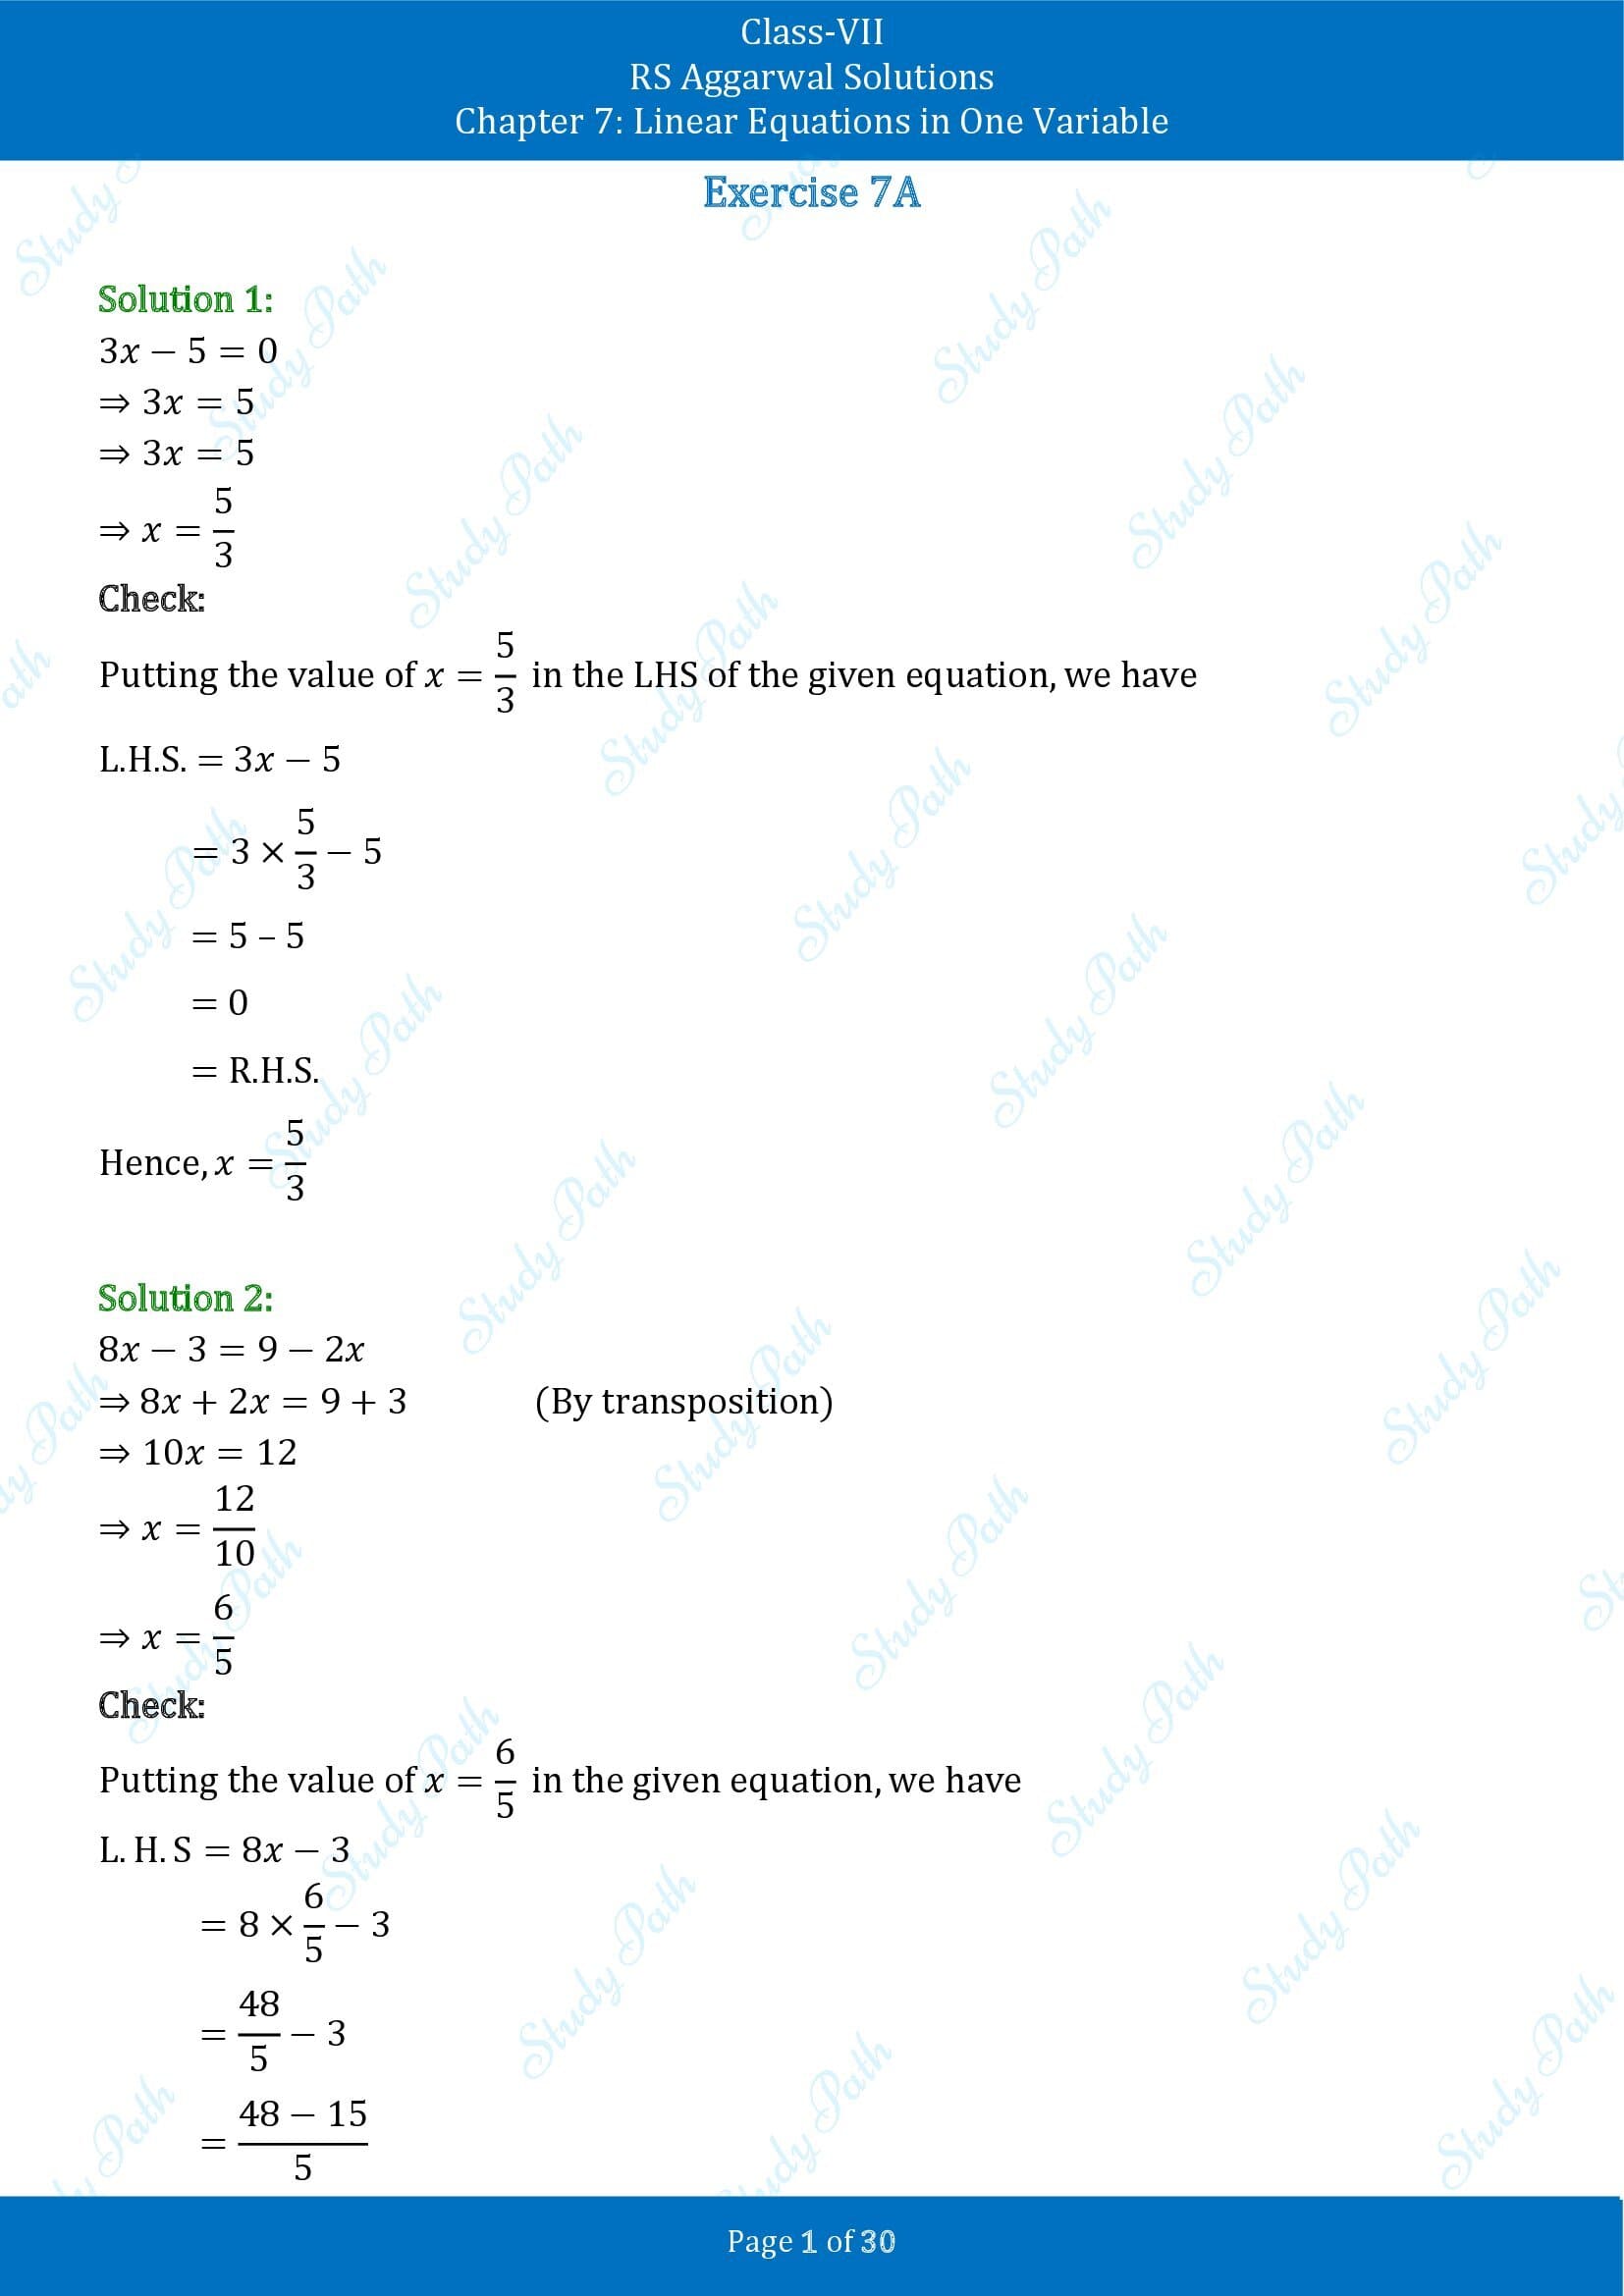 RS Aggarwal Solutions Class 7 Chapter 7 Linear Equations in One Variable Exercise 7A 00001